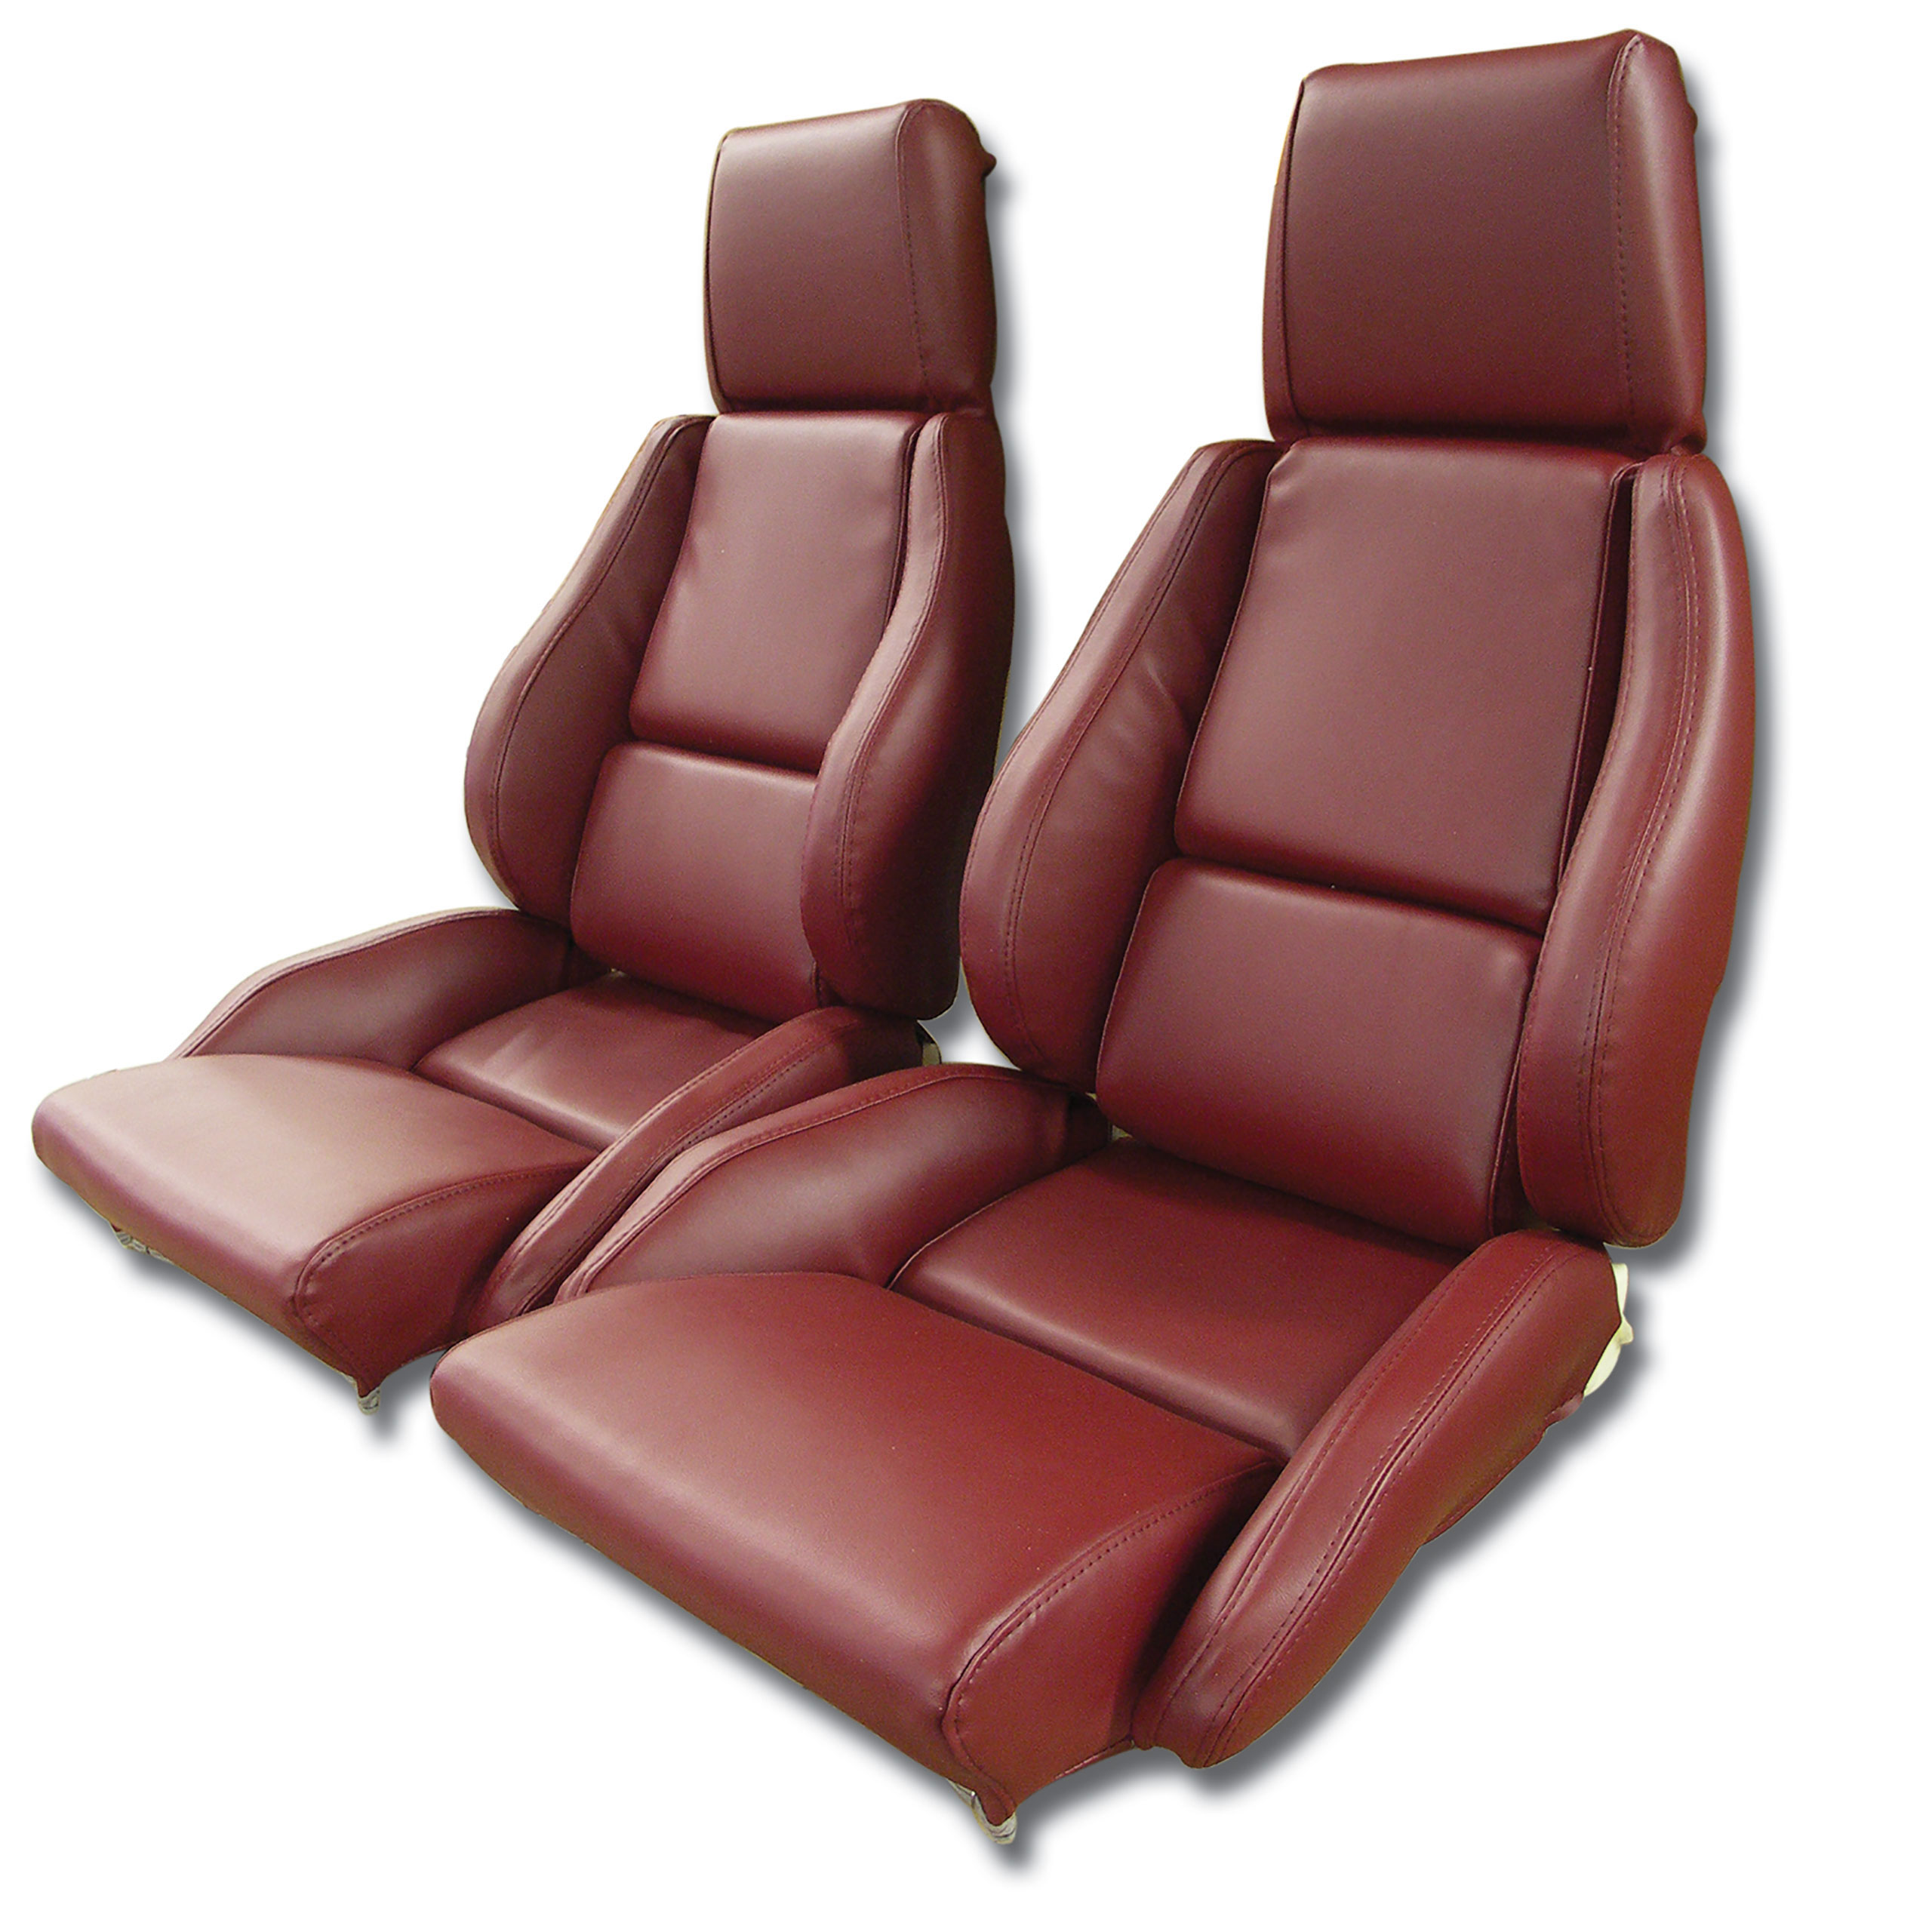 84-85 Corvette C4 468427 OE Style 100% Leather Standard Seat Covers W/O Perforated Inserts Red CA-468727 